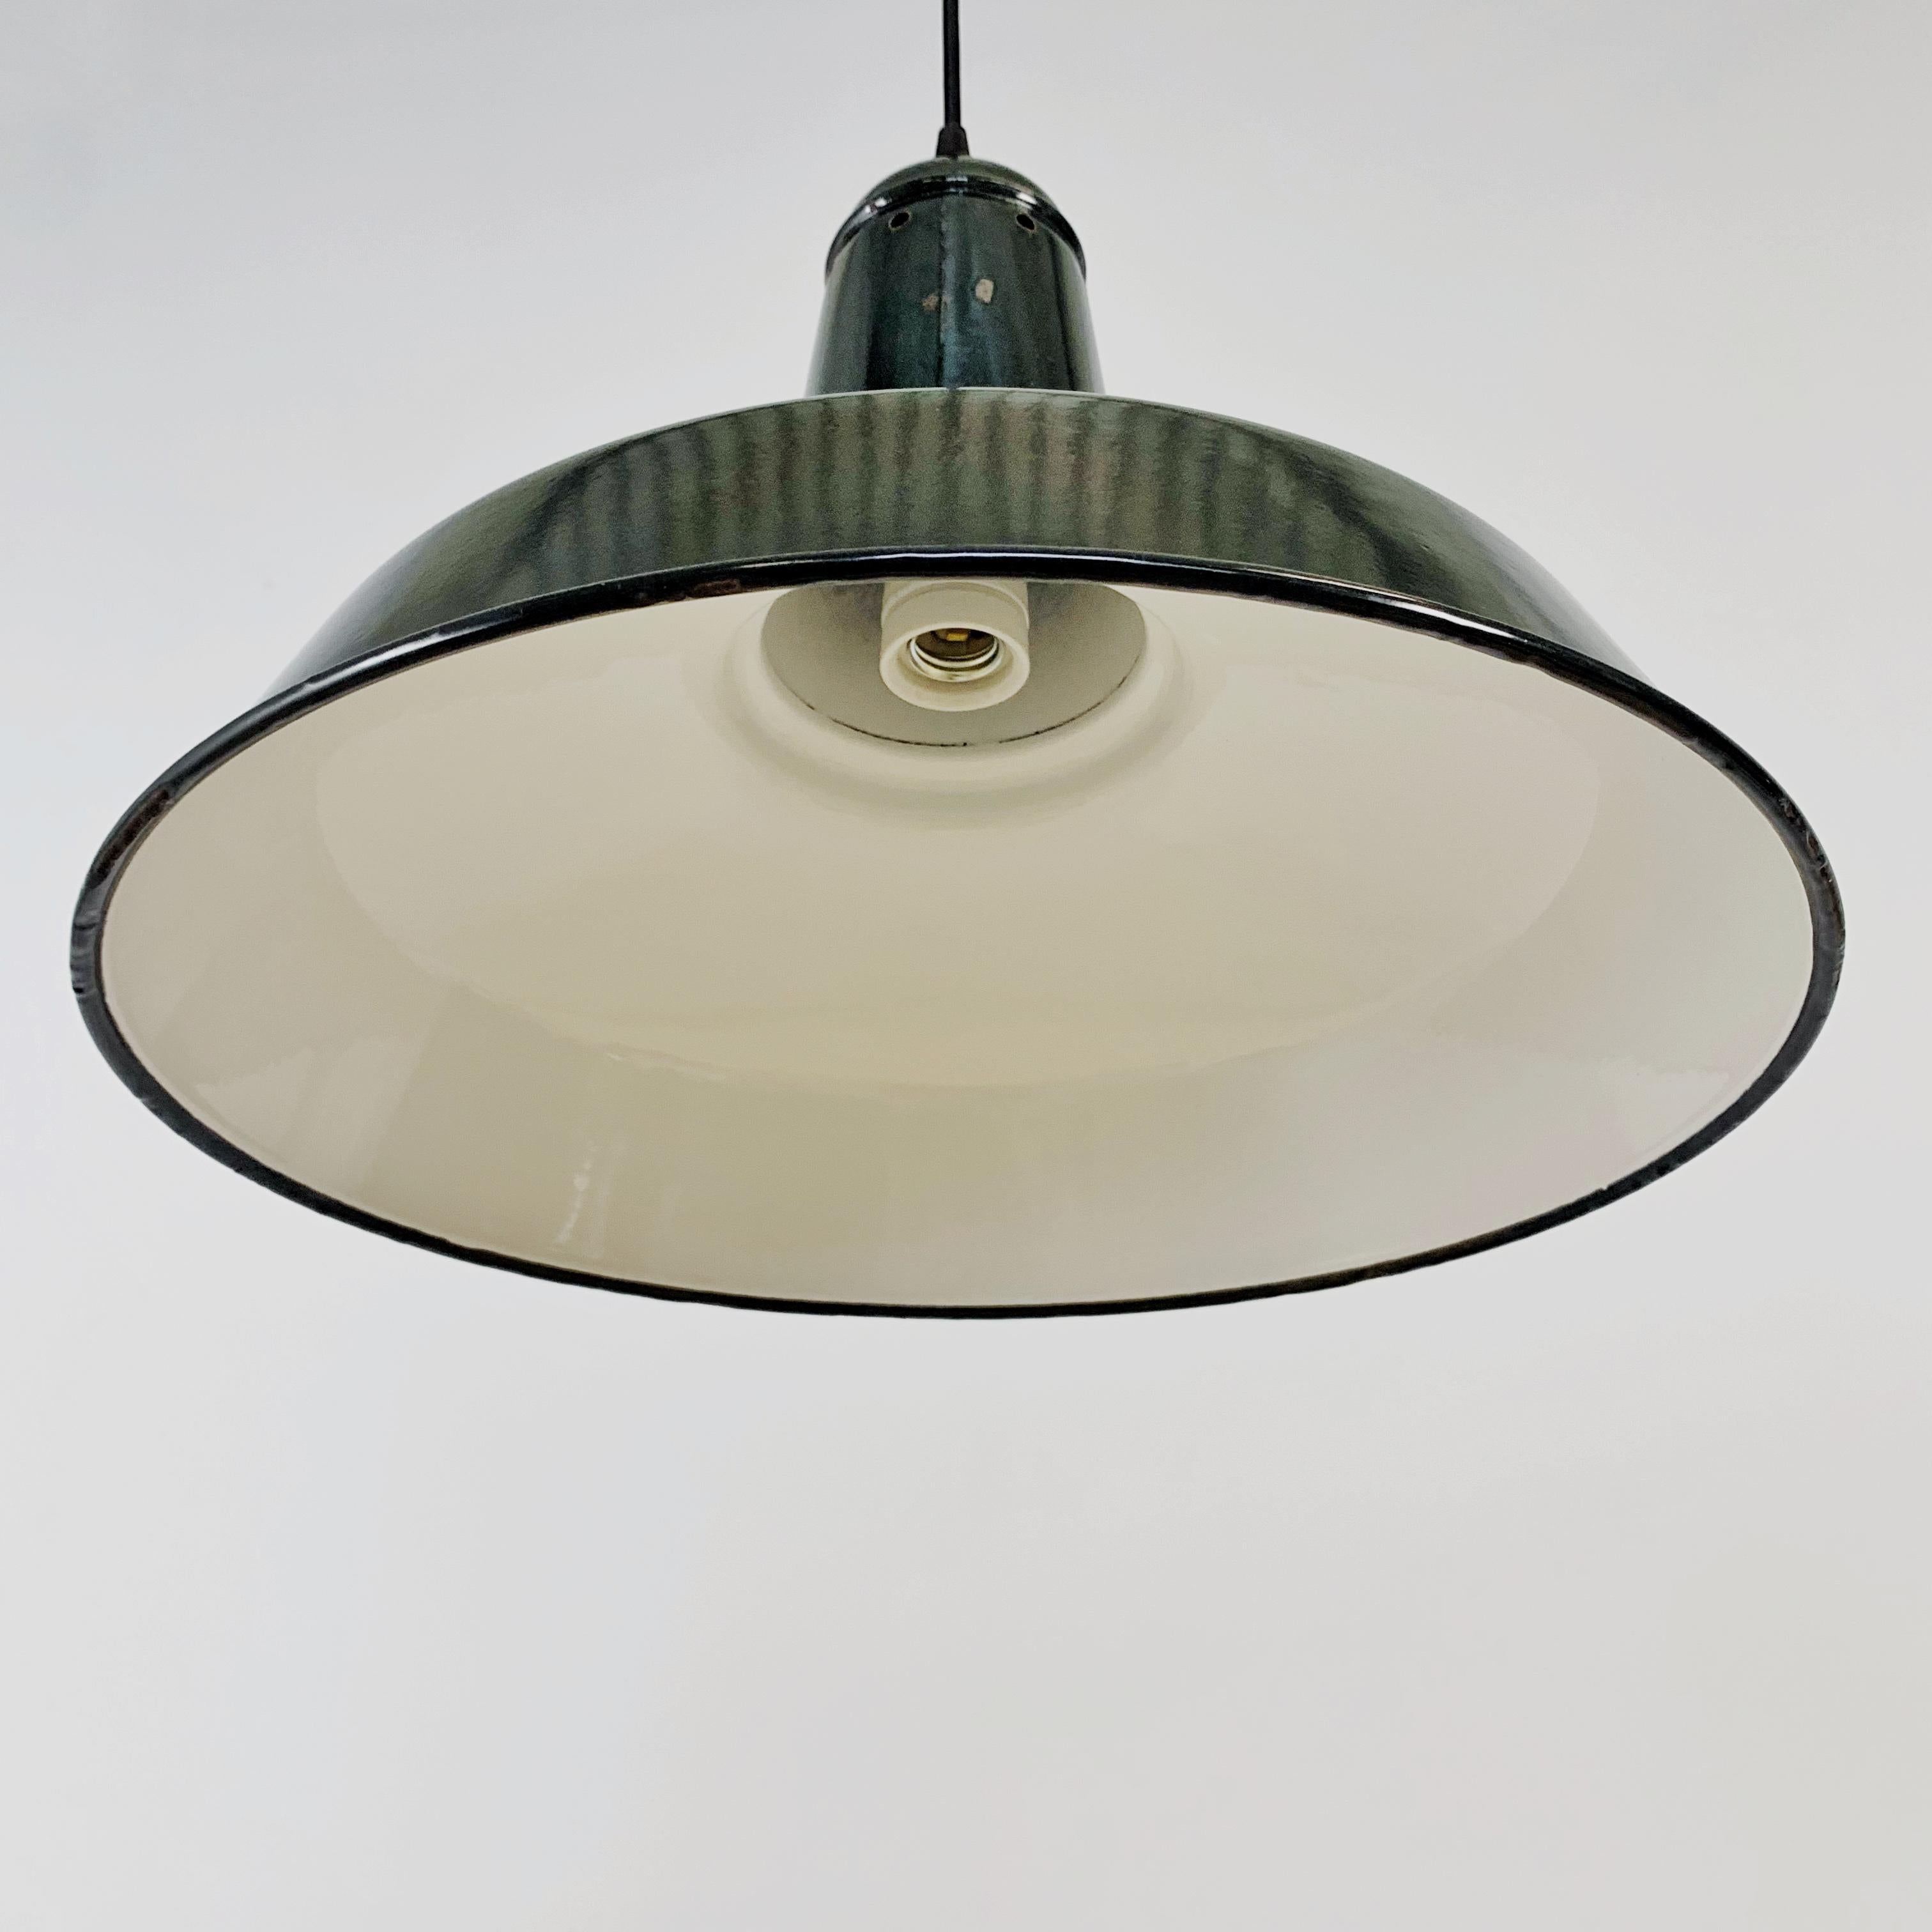 20th Century French Enamel Vintage Industrial Pendant Light Black / Anthracite For Sale